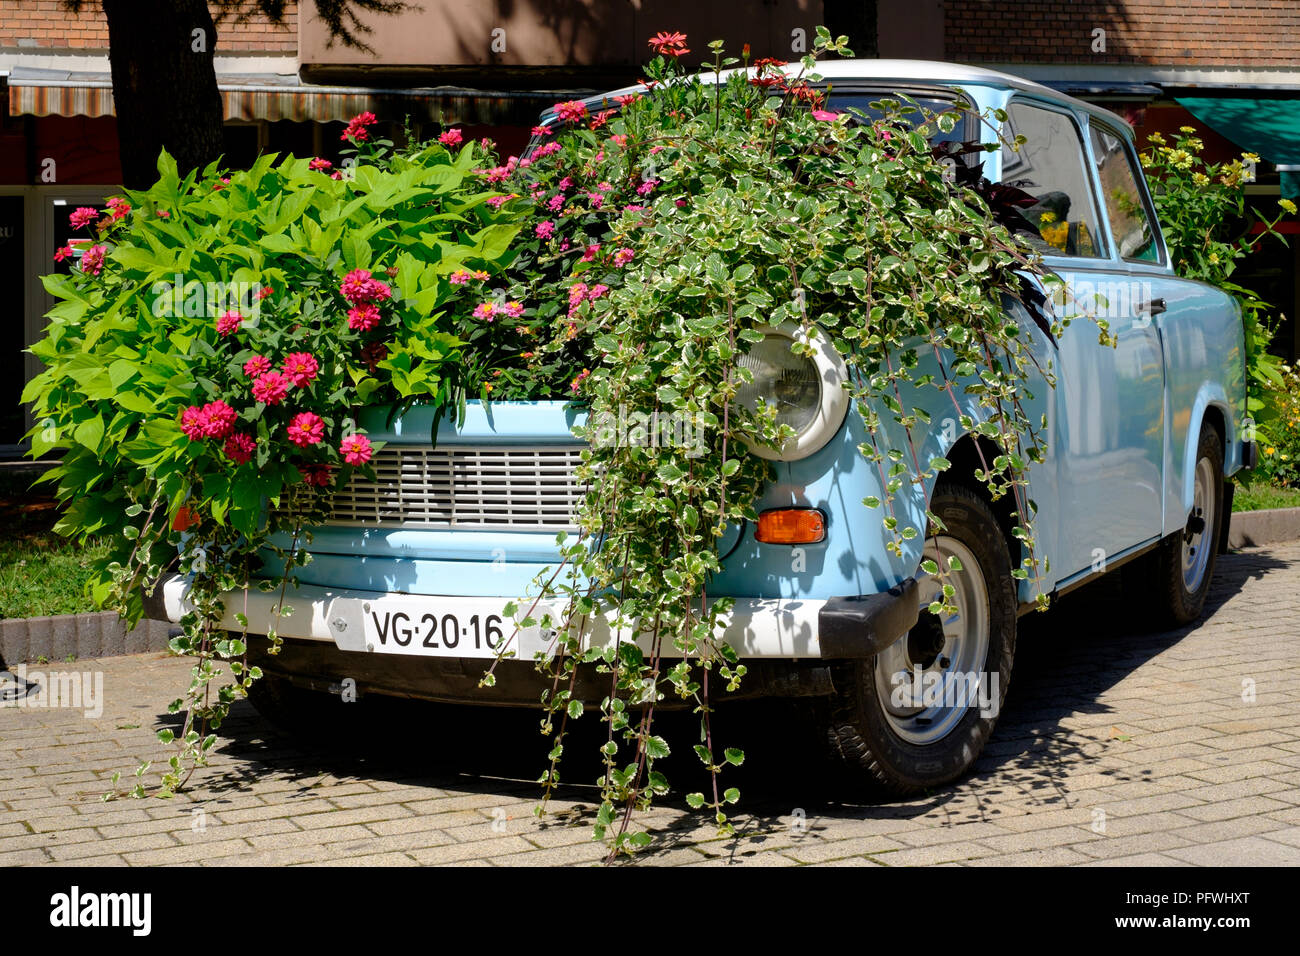 trabant 601 car cosmetically restored and converted into a flowerbed for public display zalaegerszeg zala county hungary Stock Photo